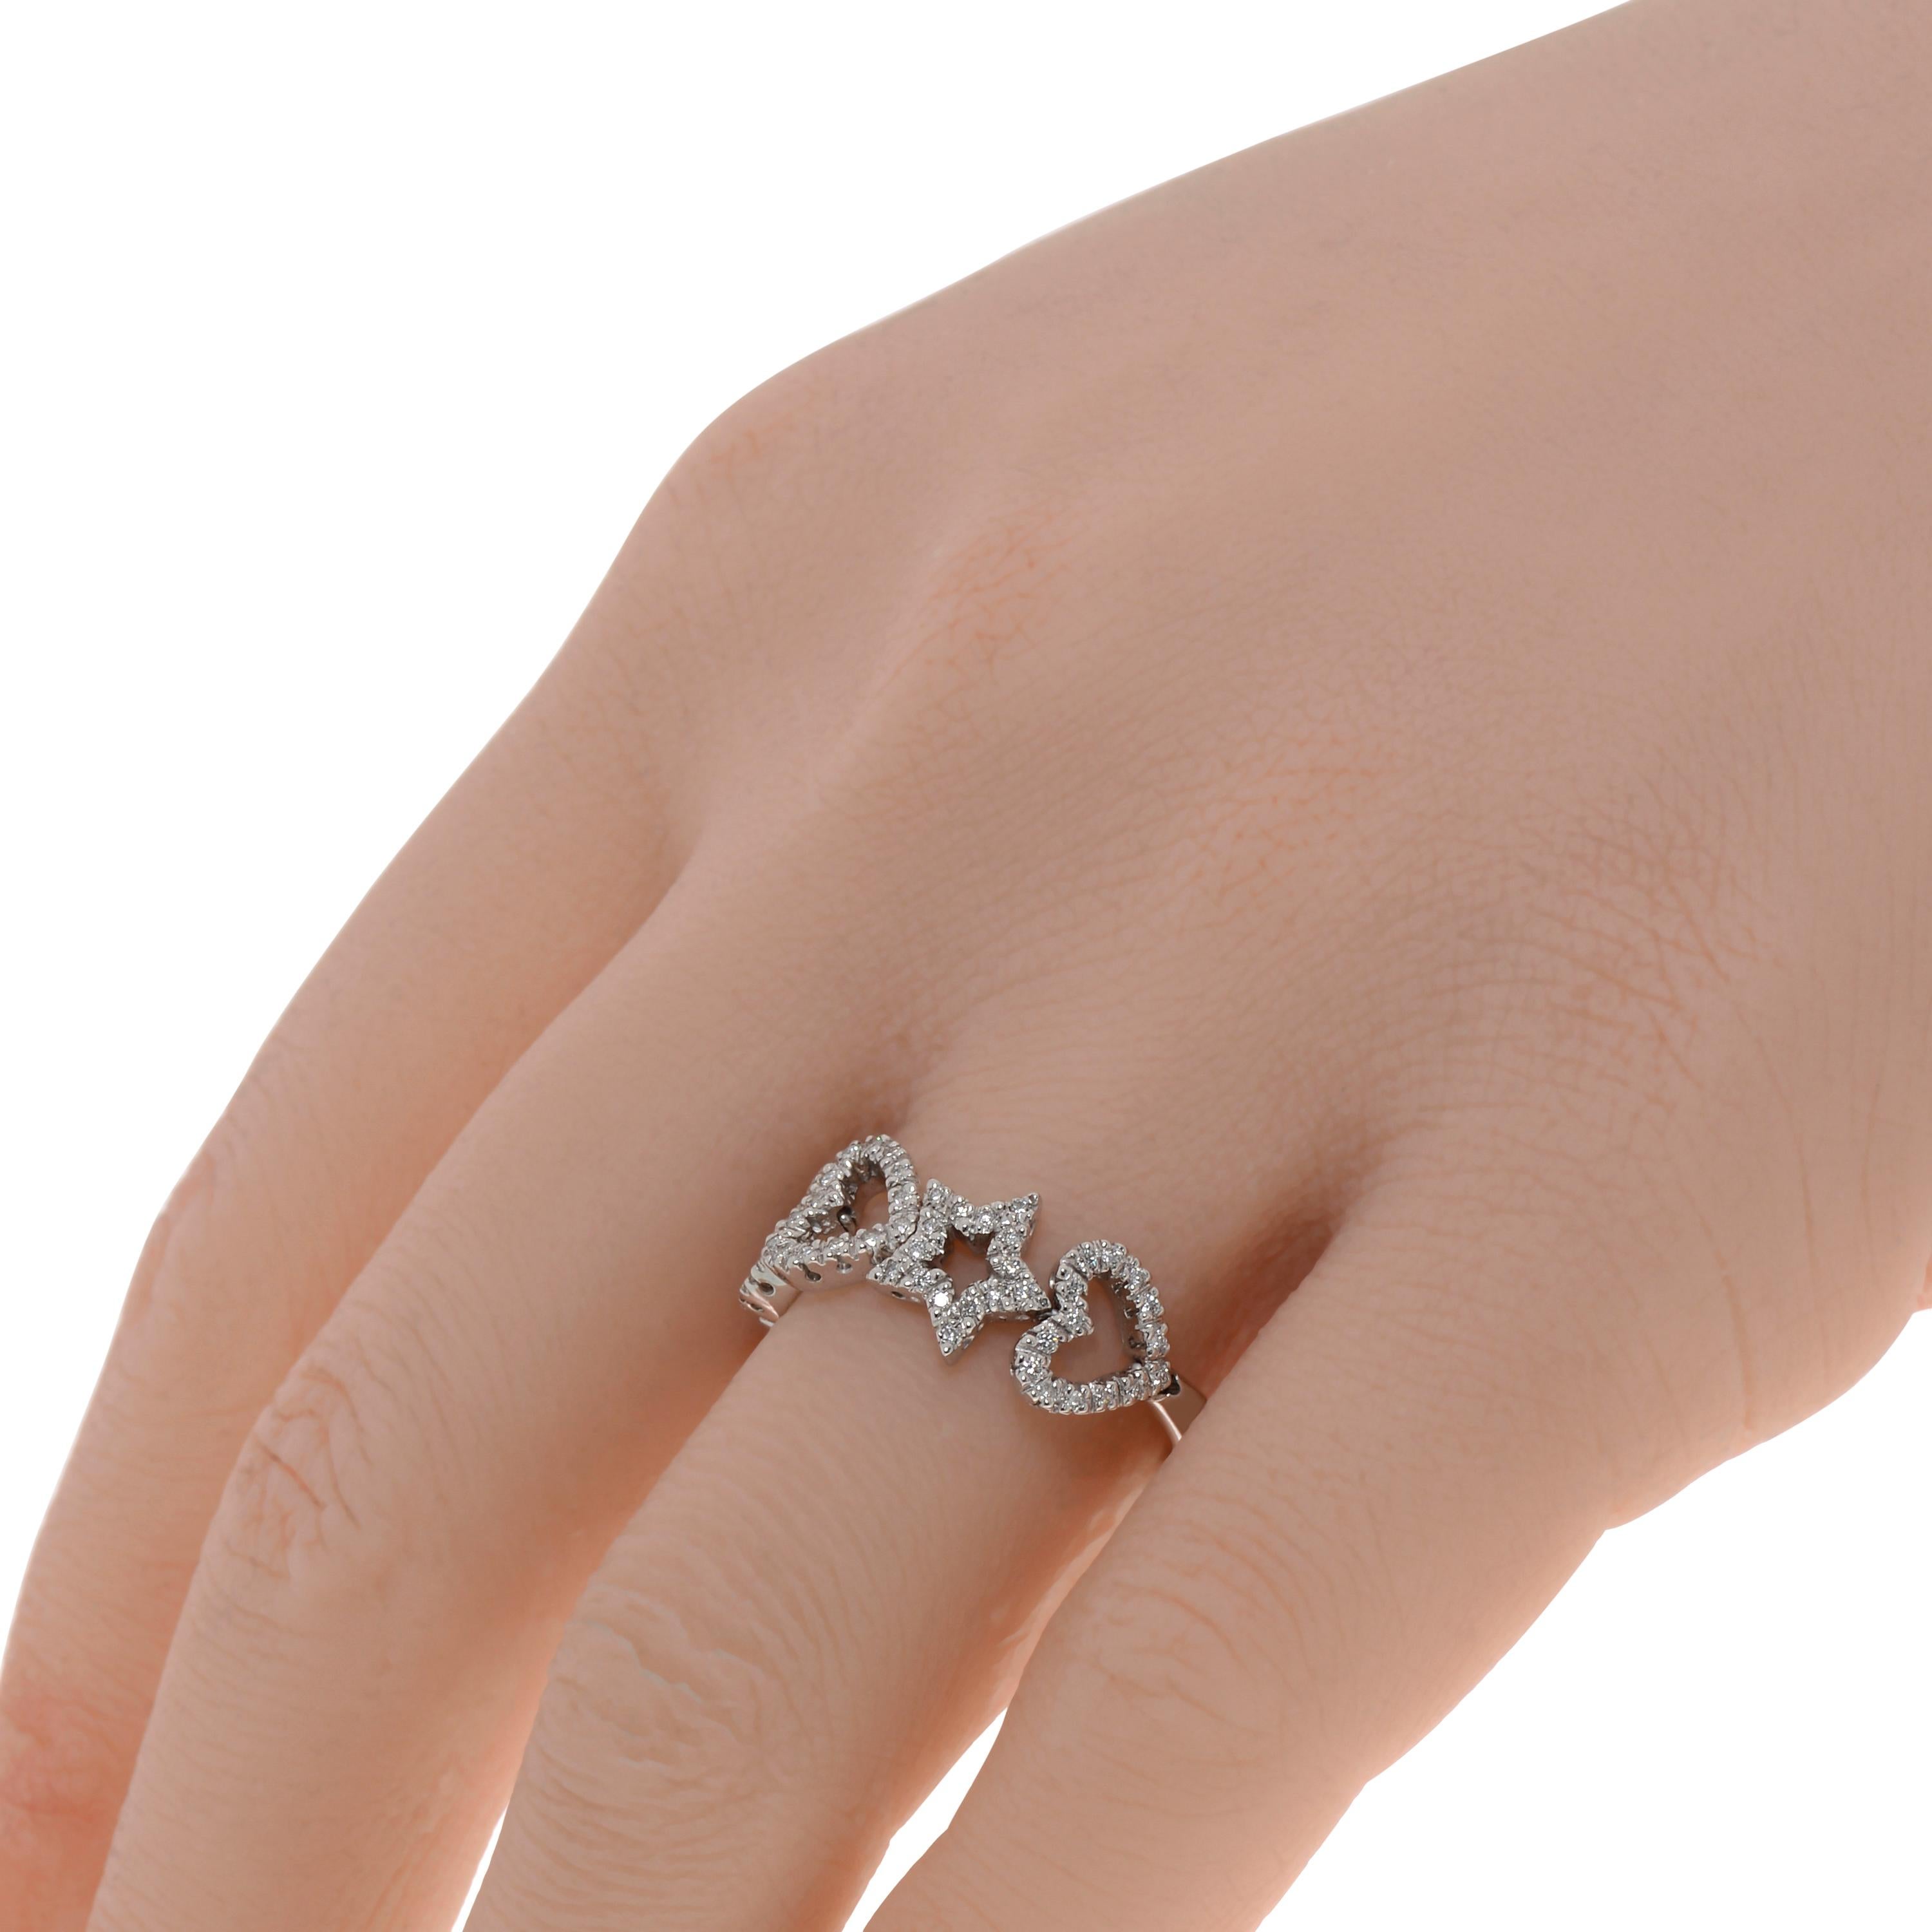 This playful Piero Milano 18K White Gold Band Ring features open work designs adorned with glittering diamonds 0.28ct. tw. in a shared prong setting. The ring size is 7.5 (55.7). The Band Width is 8.1mm. The Weight is 6.3g. Diamond Color: G-H.